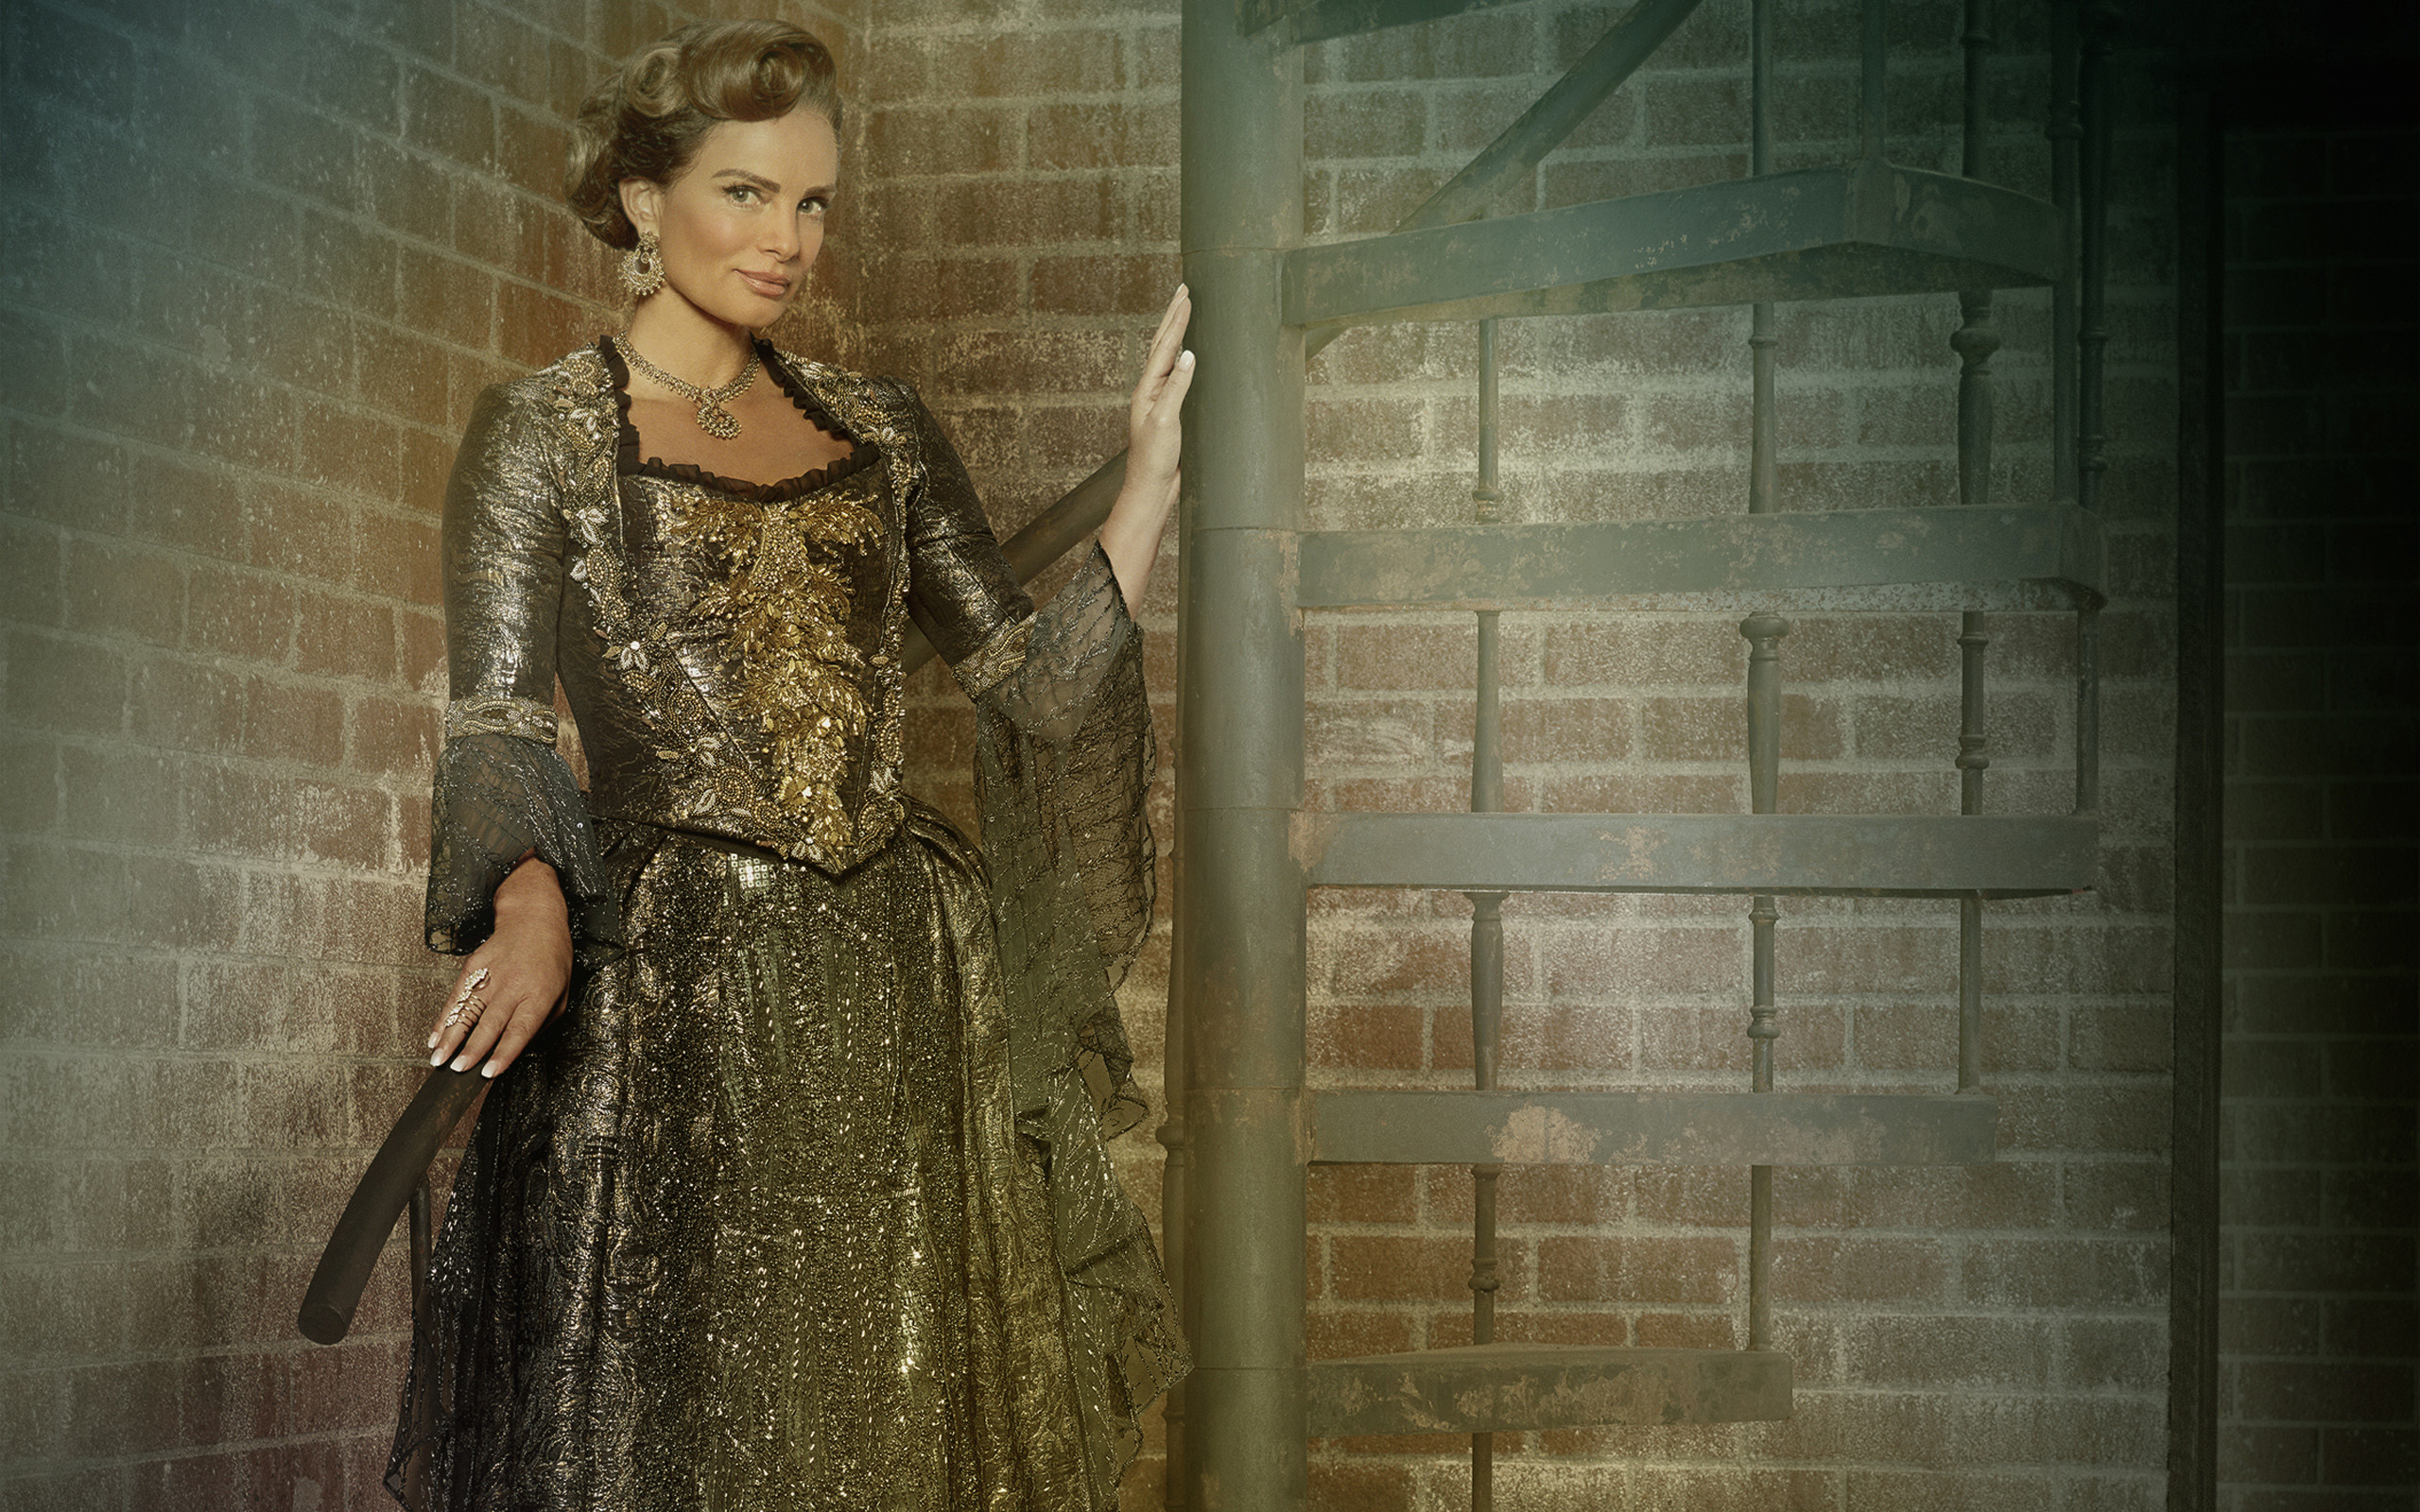 2560x1600 Once Upon a Time season 7 Wallpaper with Tremaine - Victoria Belfrey